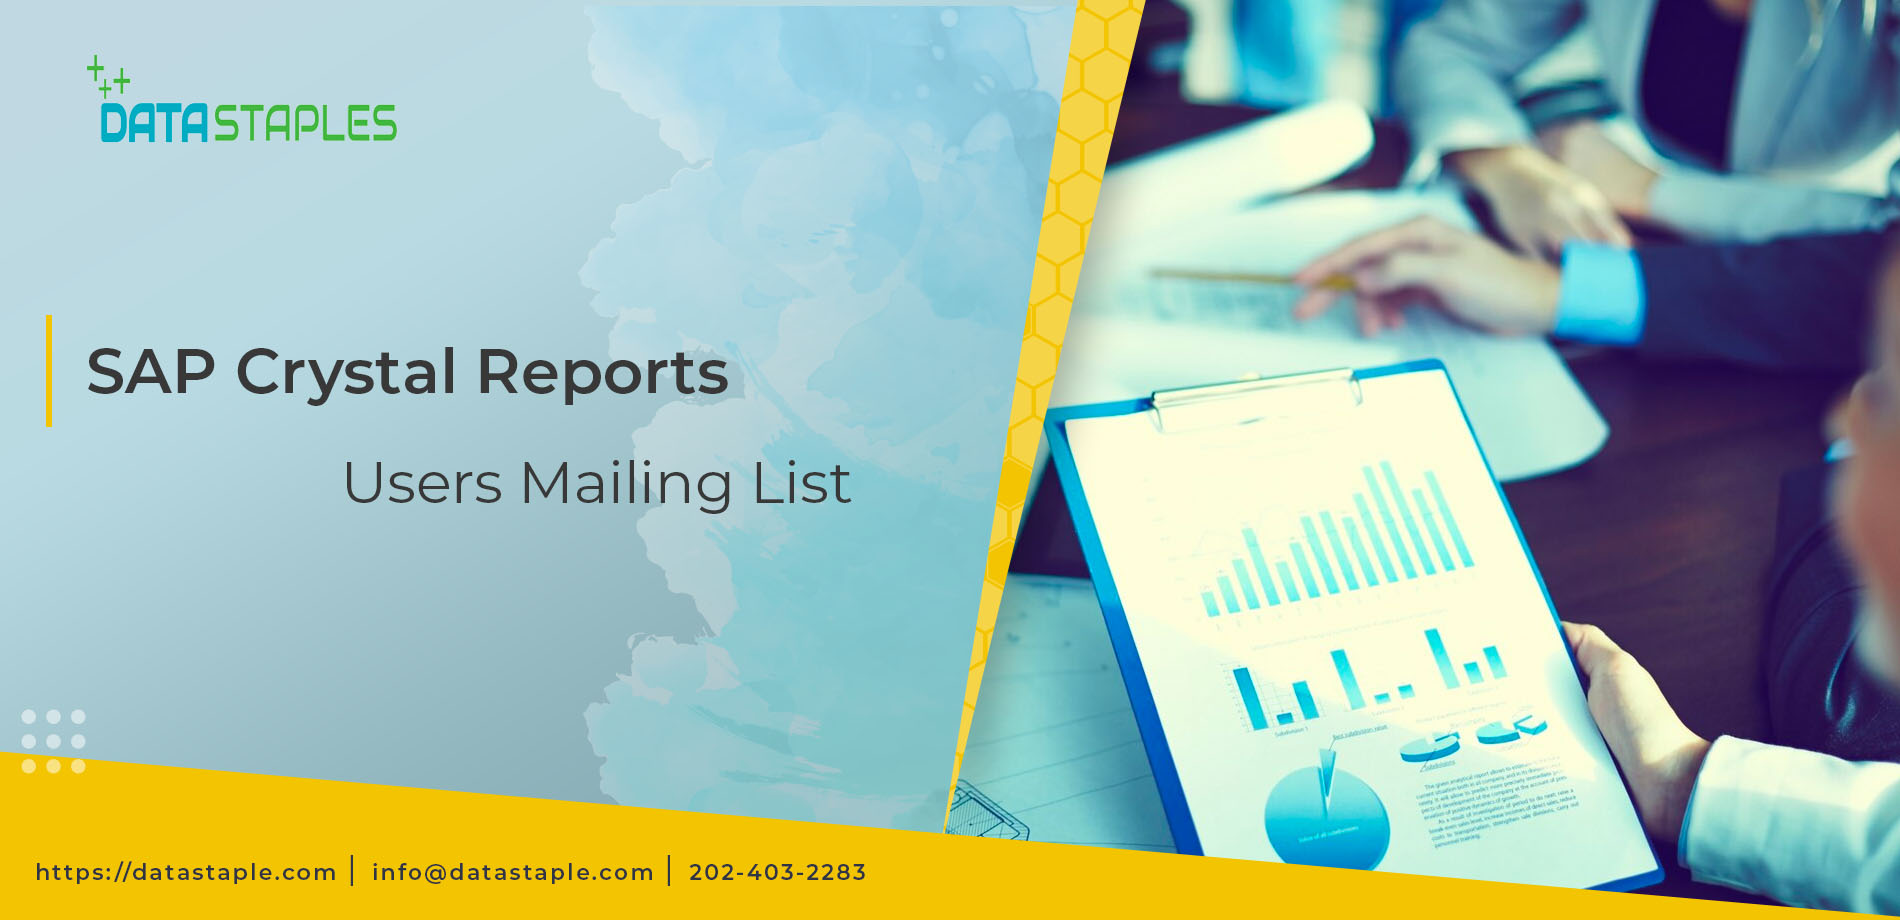 SAP Crystal Reports Users Mailing List | DataStaples